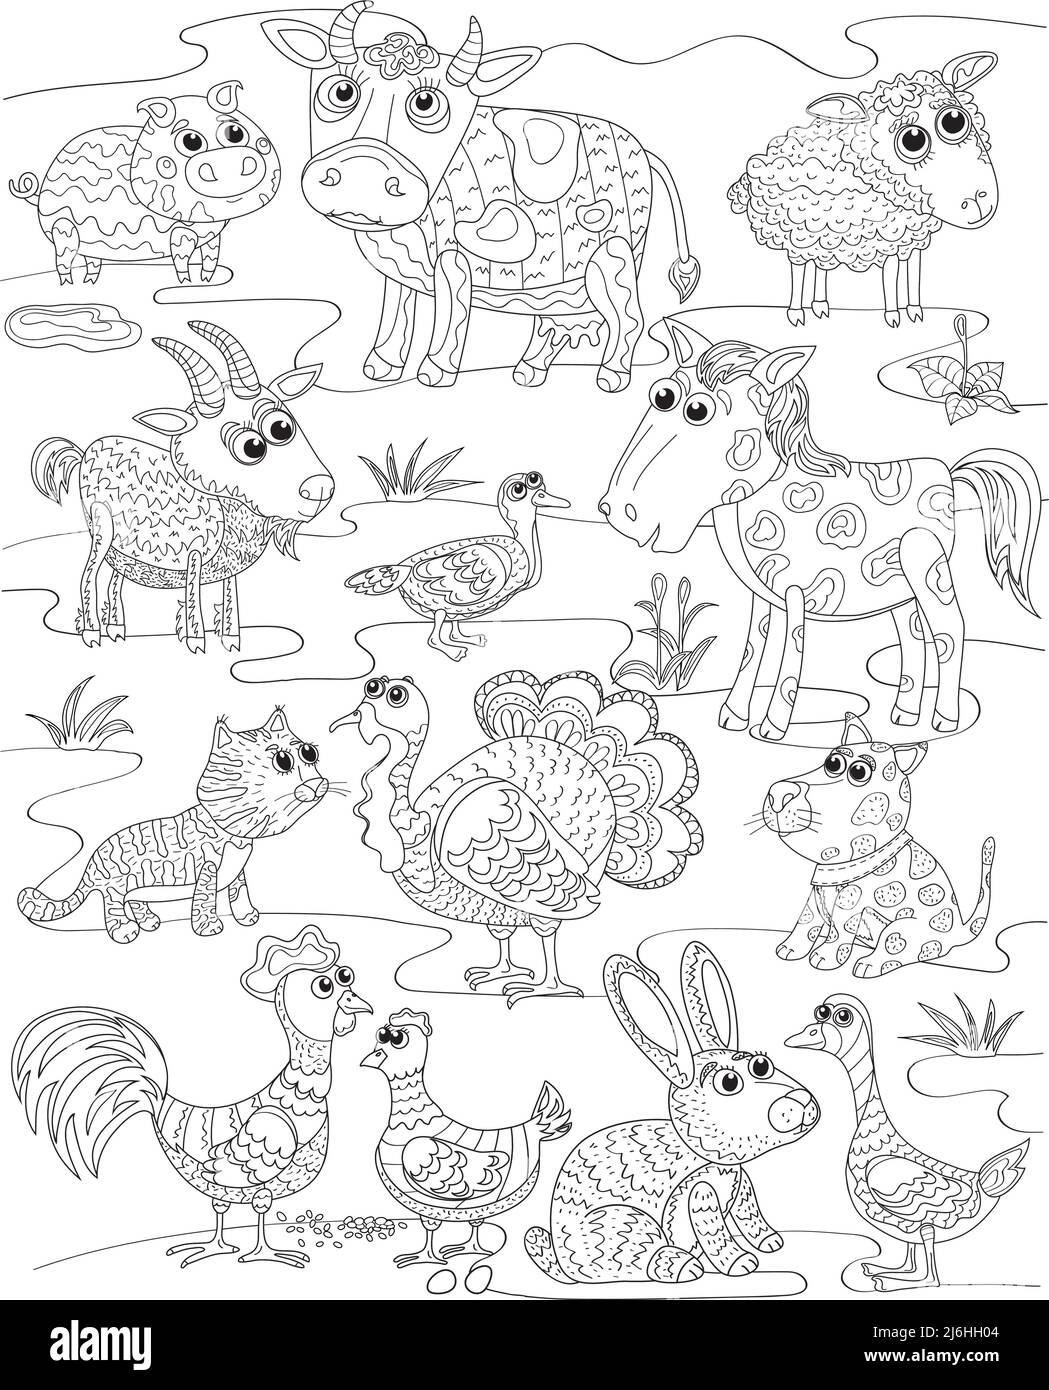 funny village animals, outlined doodle anti-stress coloring page cute village animals. Coloring book page for adults and children Stock Vector